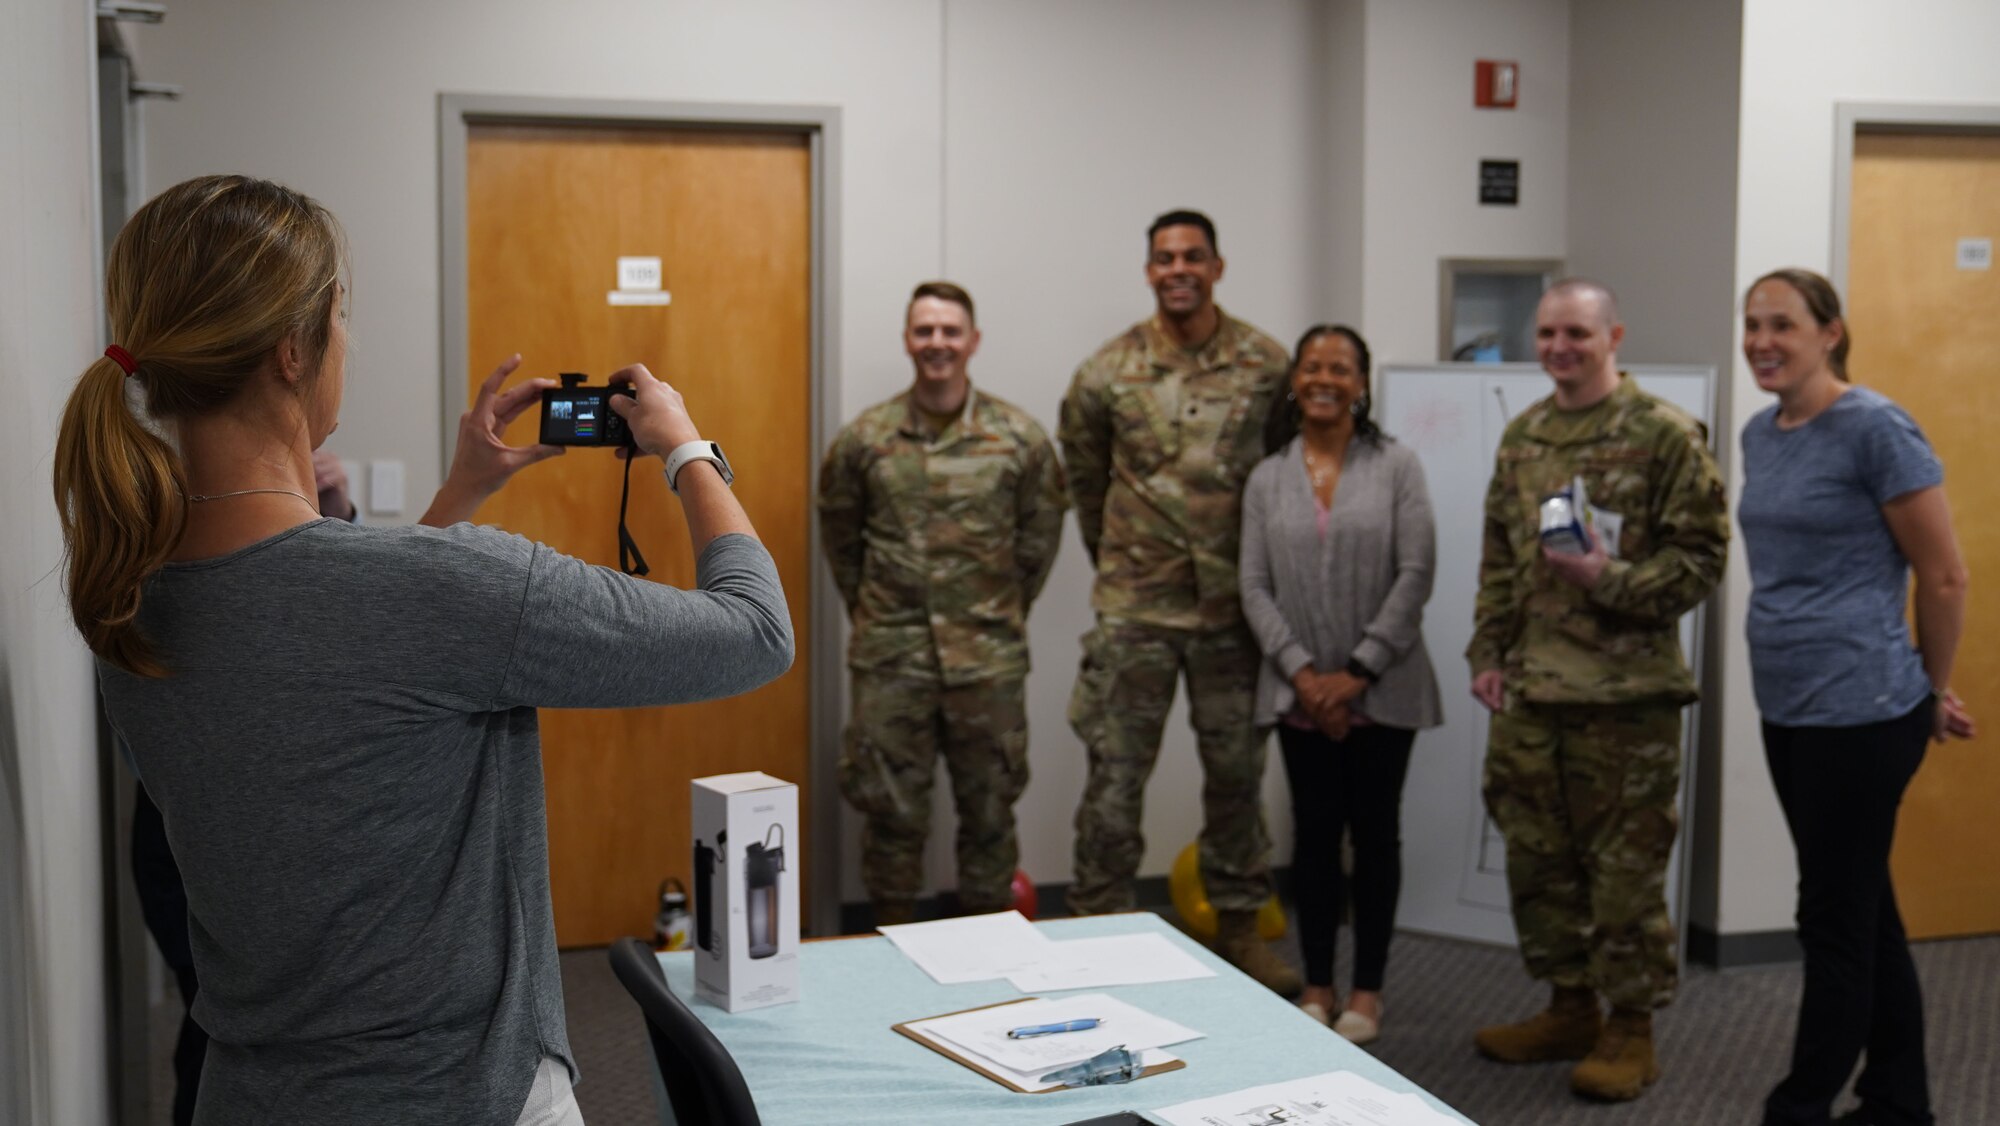 Mary Ruffin, 81st Training Wing Operational Support Team licensed clinical social worker, takes a photo of attendees of the Dragon Blitz event in the Vosler Center on Keesler Air Force Base, Mississippi, March 28, 2023.